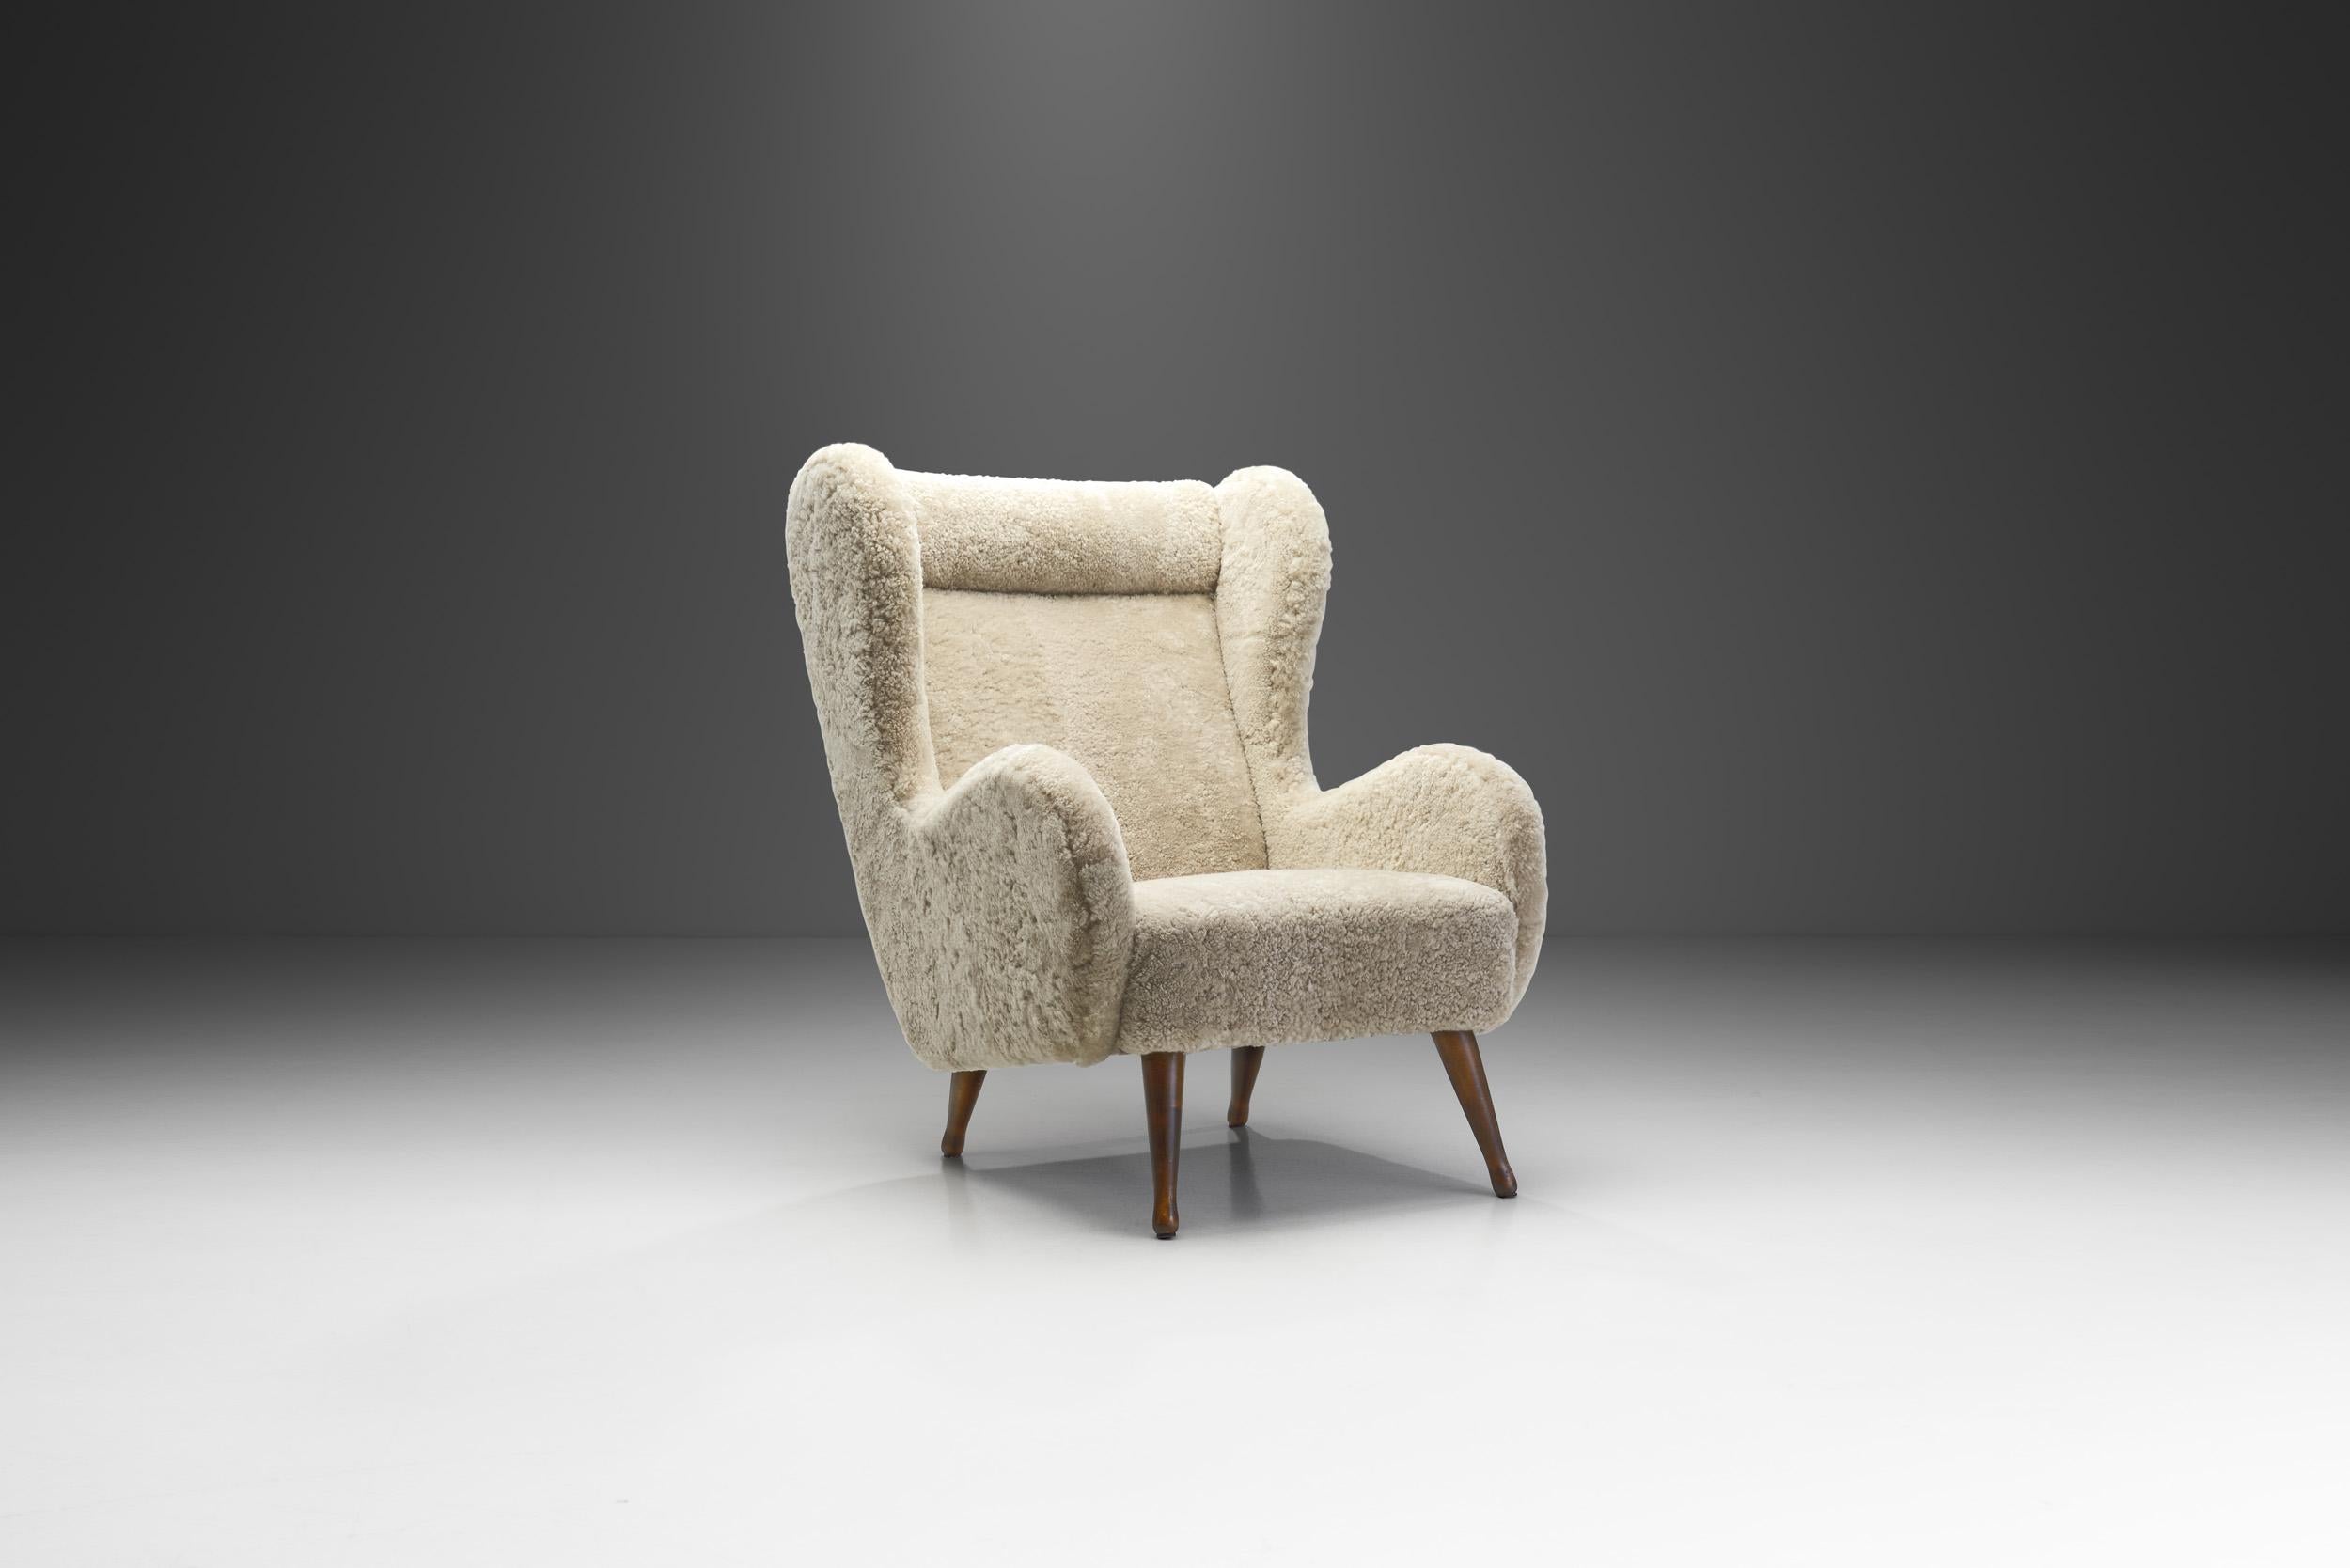 Throughout Scandinavia, there's a long history of pride in craftsmanship using natural materials like wood. This is especially true for Sweden. This unique 1940s winged armchair is a great representation of the quality and craftsmanship of Swedish